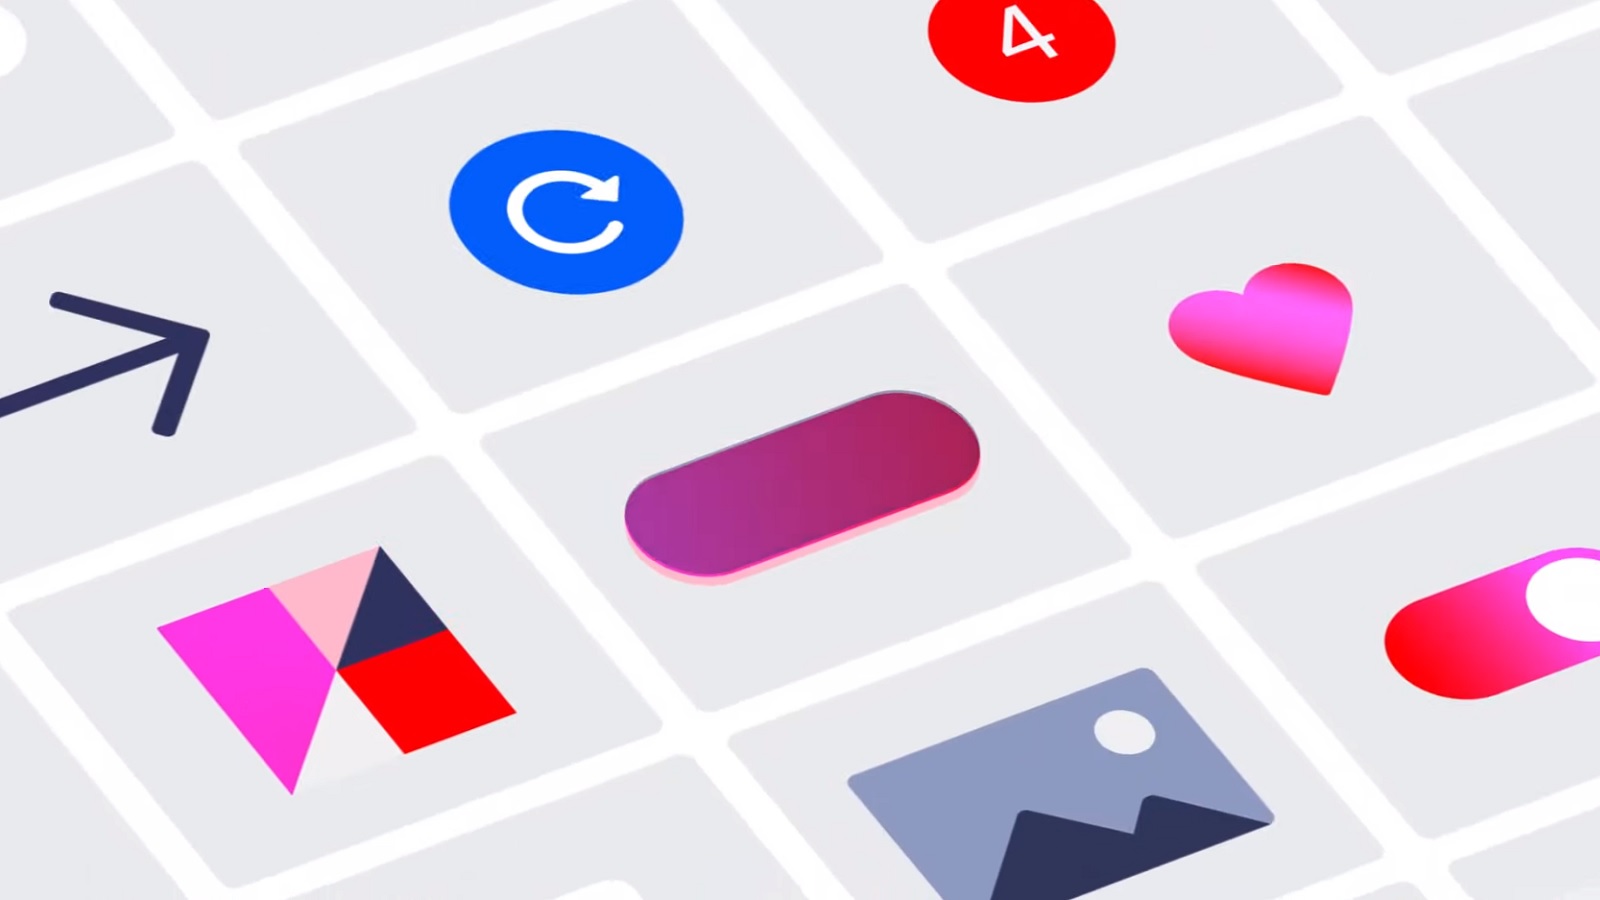 Let Yourself Be Inspired by Adobe XD’s New Visual ID